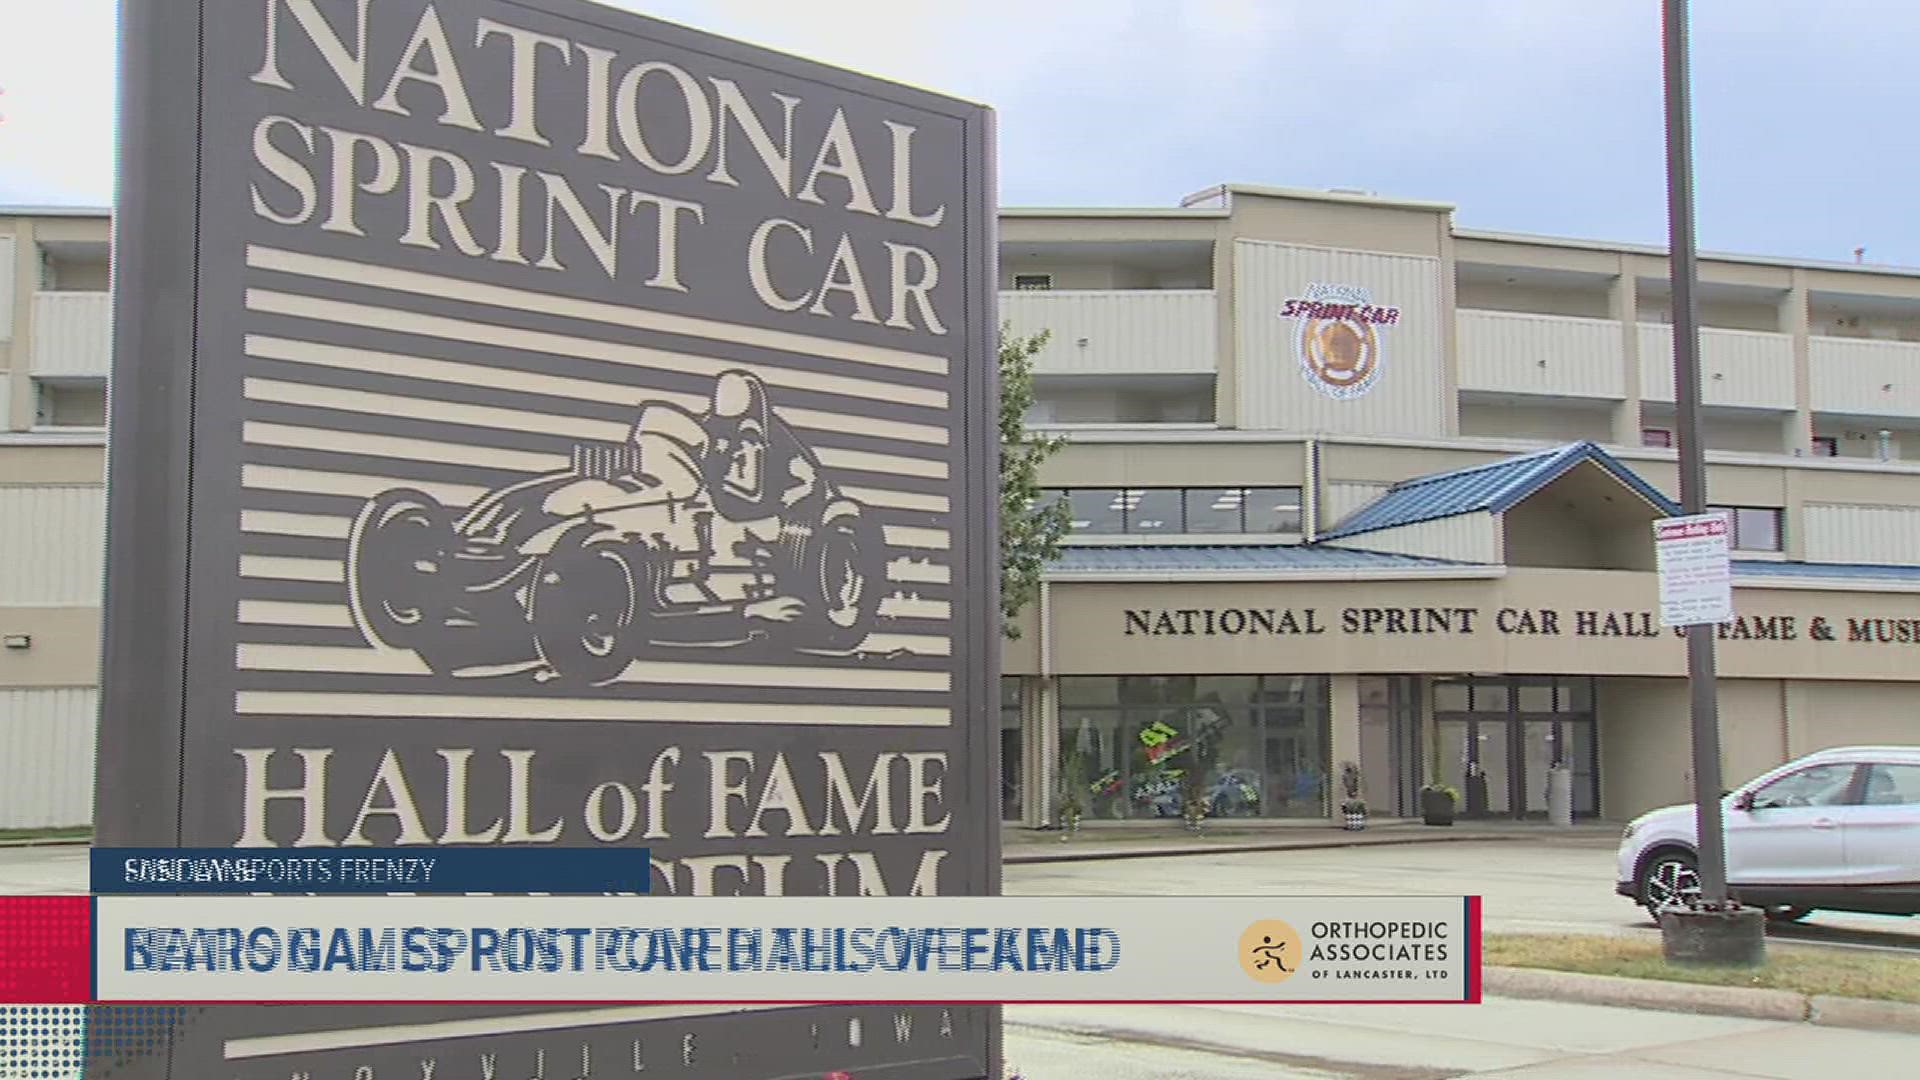 The National Sprint Car Hall of Fame opened 1991.